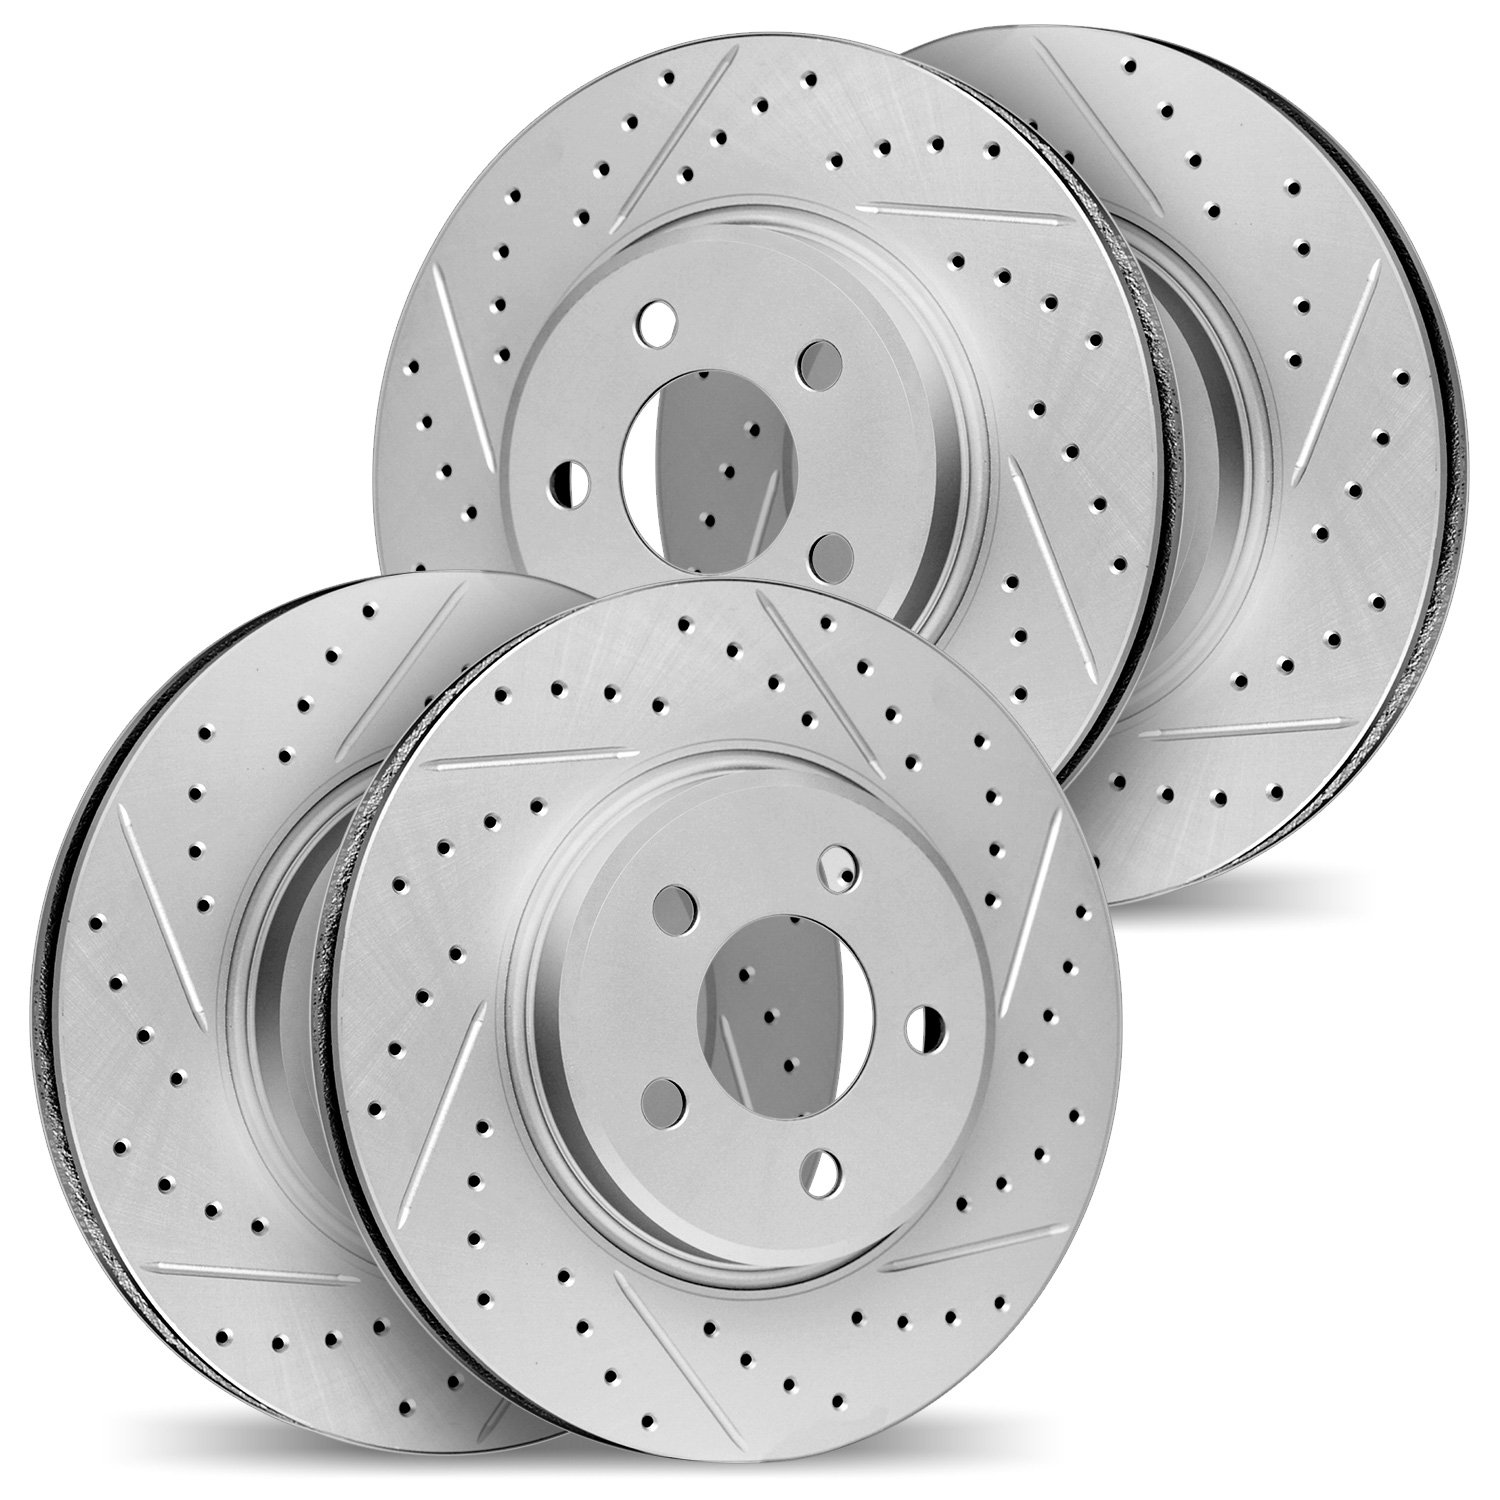 2004-74010 Geoperformance Drilled/Slotted Brake Rotors, 2000-2006 Audi/Volkswagen, Position: Front and Rear